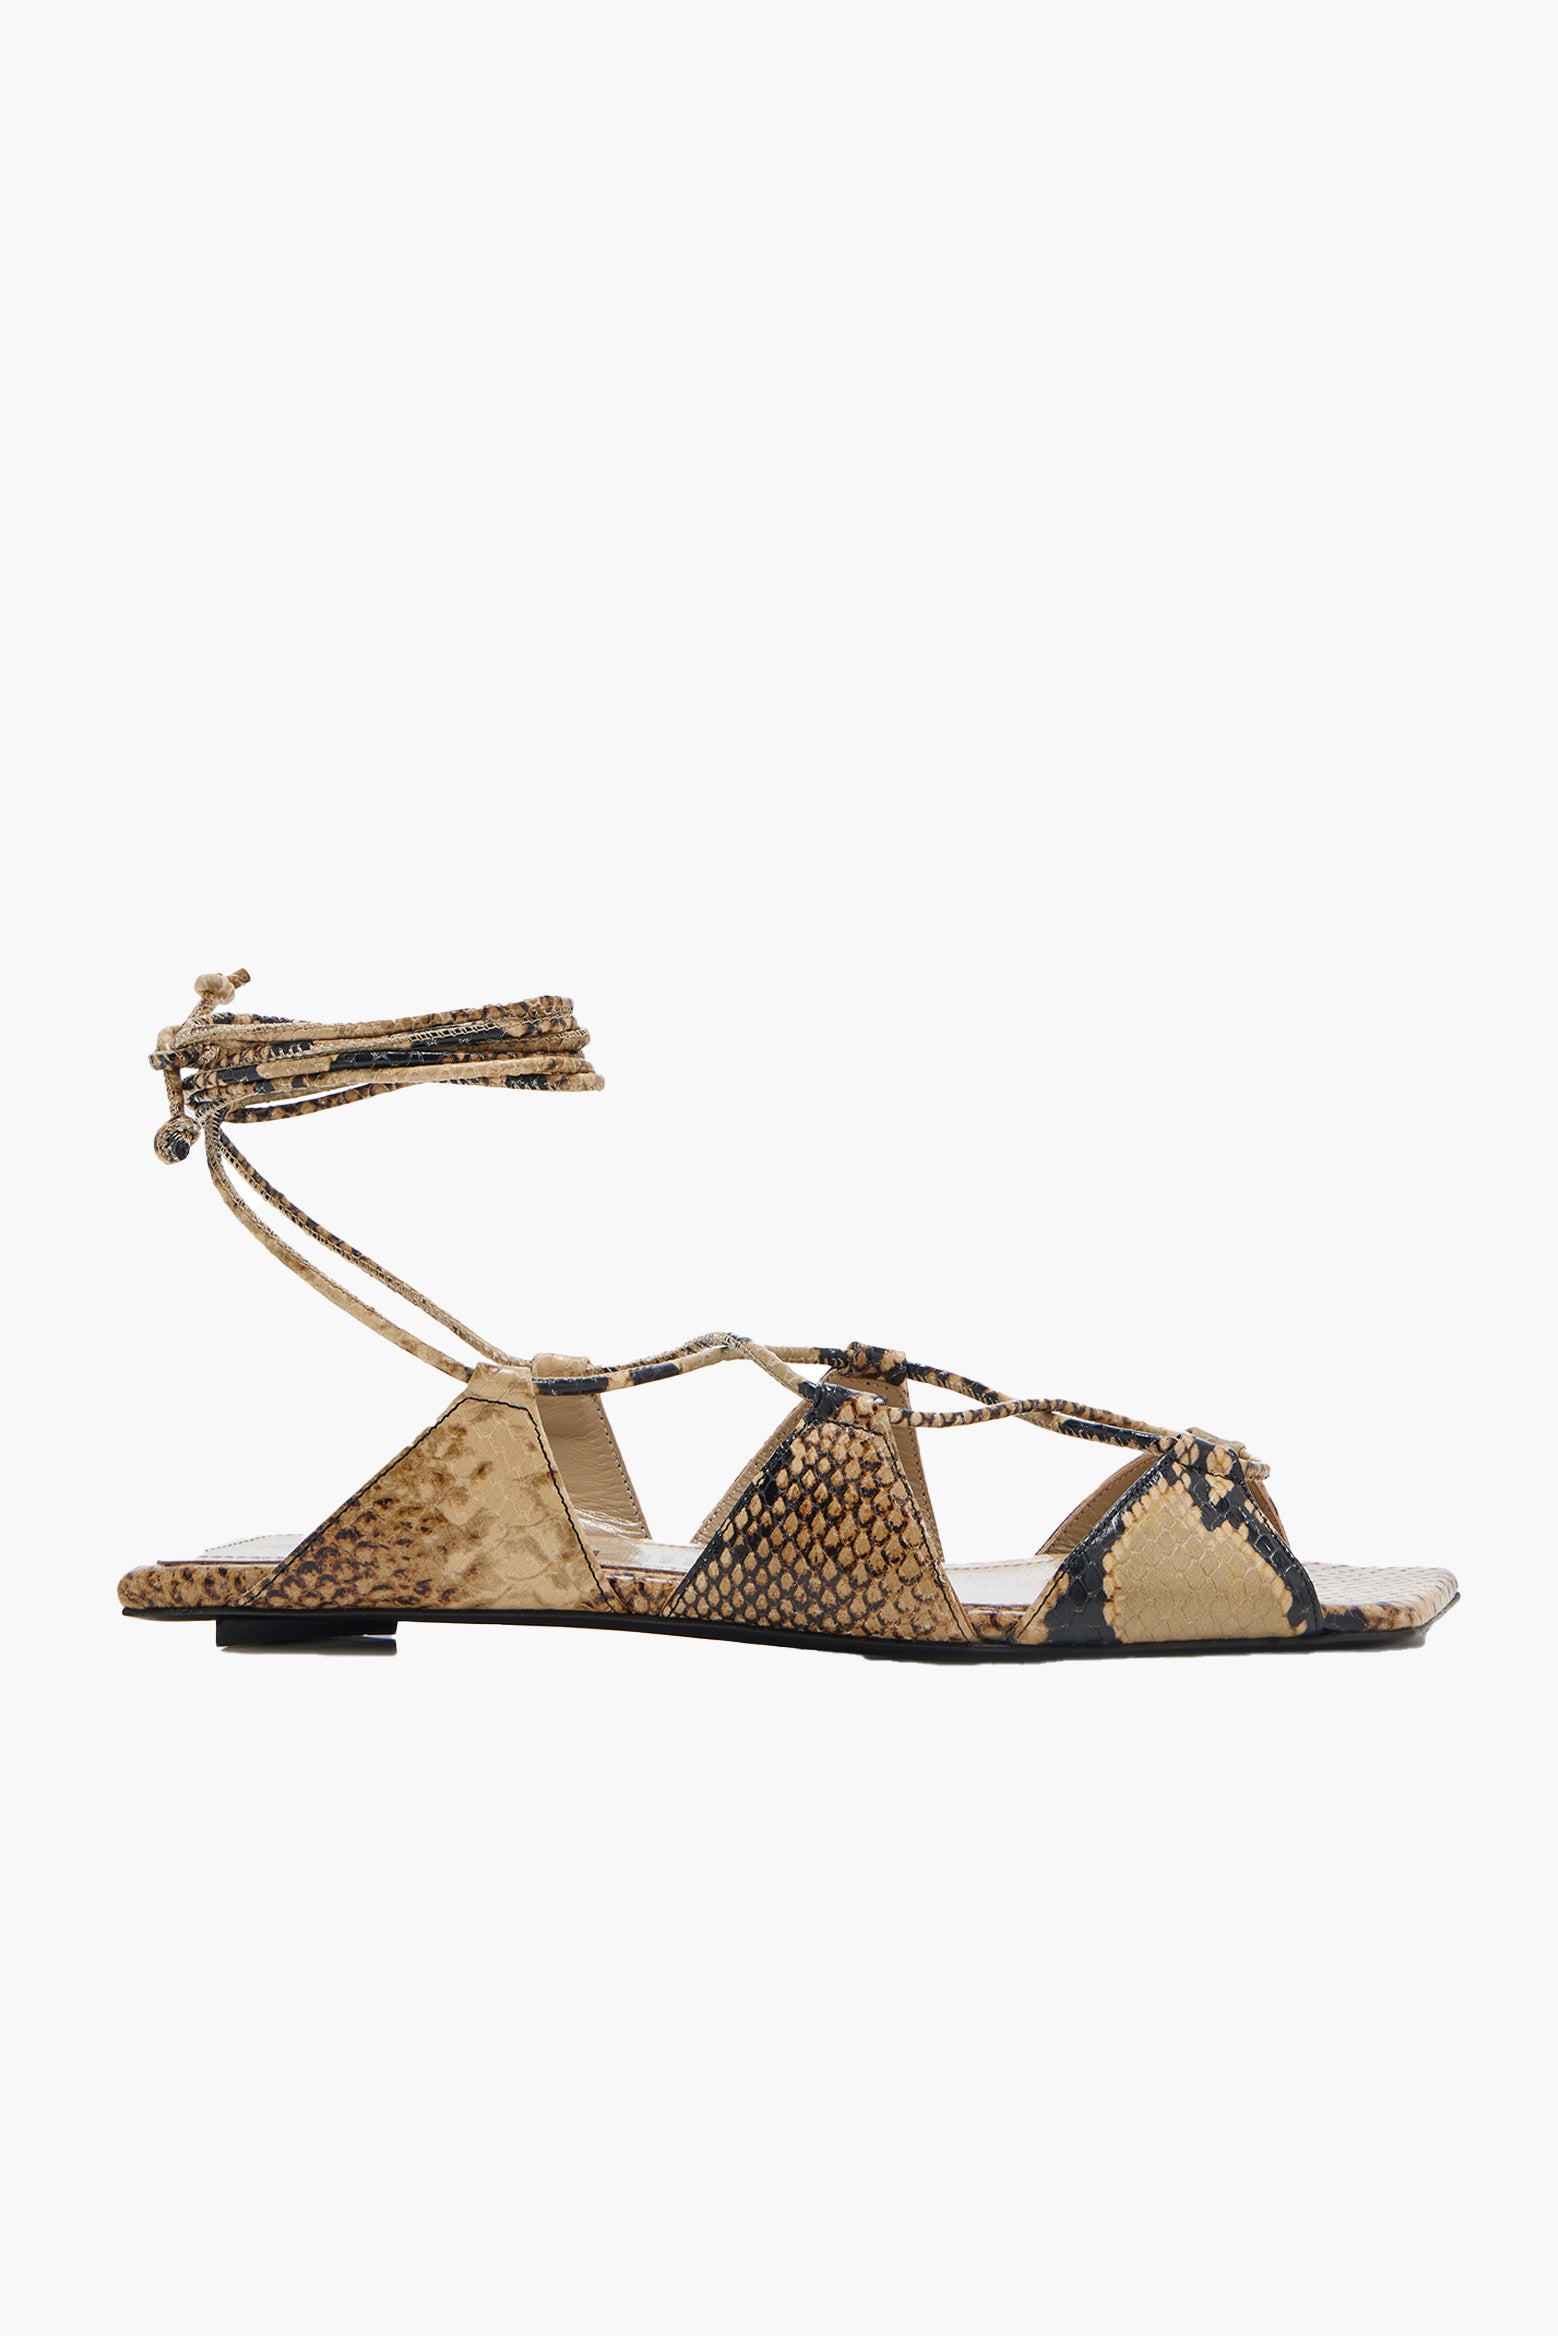 The Attico Renee Sandal in Sand Black available at The New Trend Australia